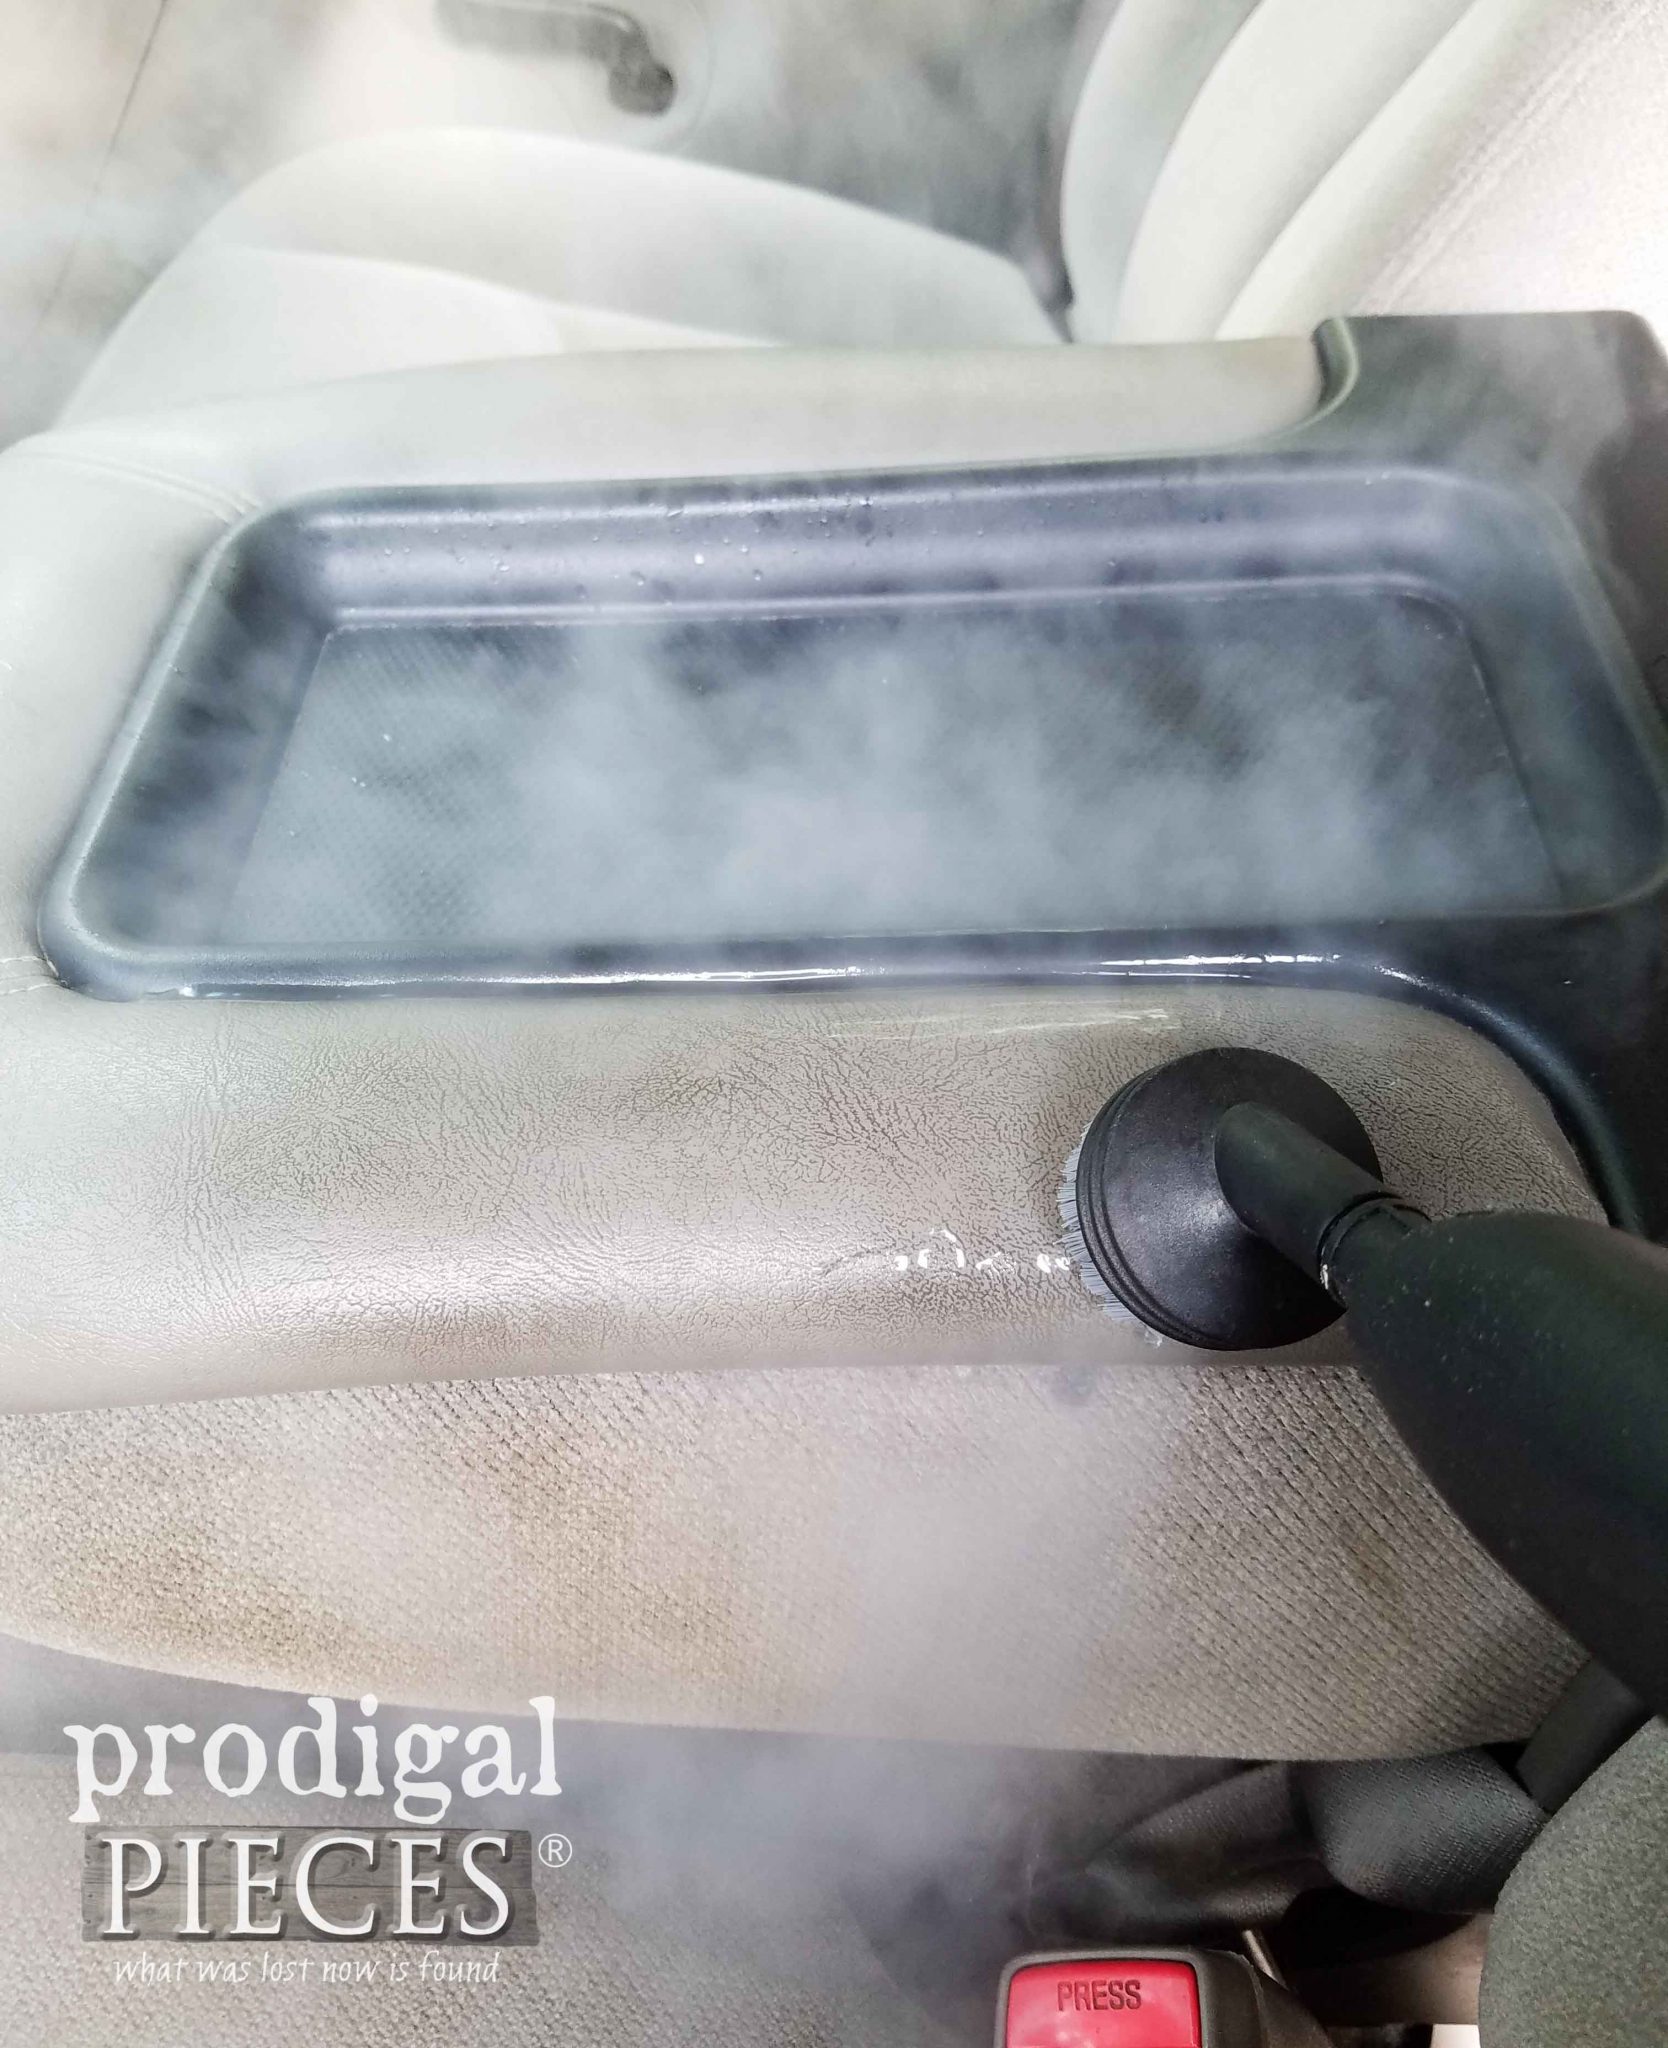 Steaming armrest with the AutoRight | prodigalpieces.com